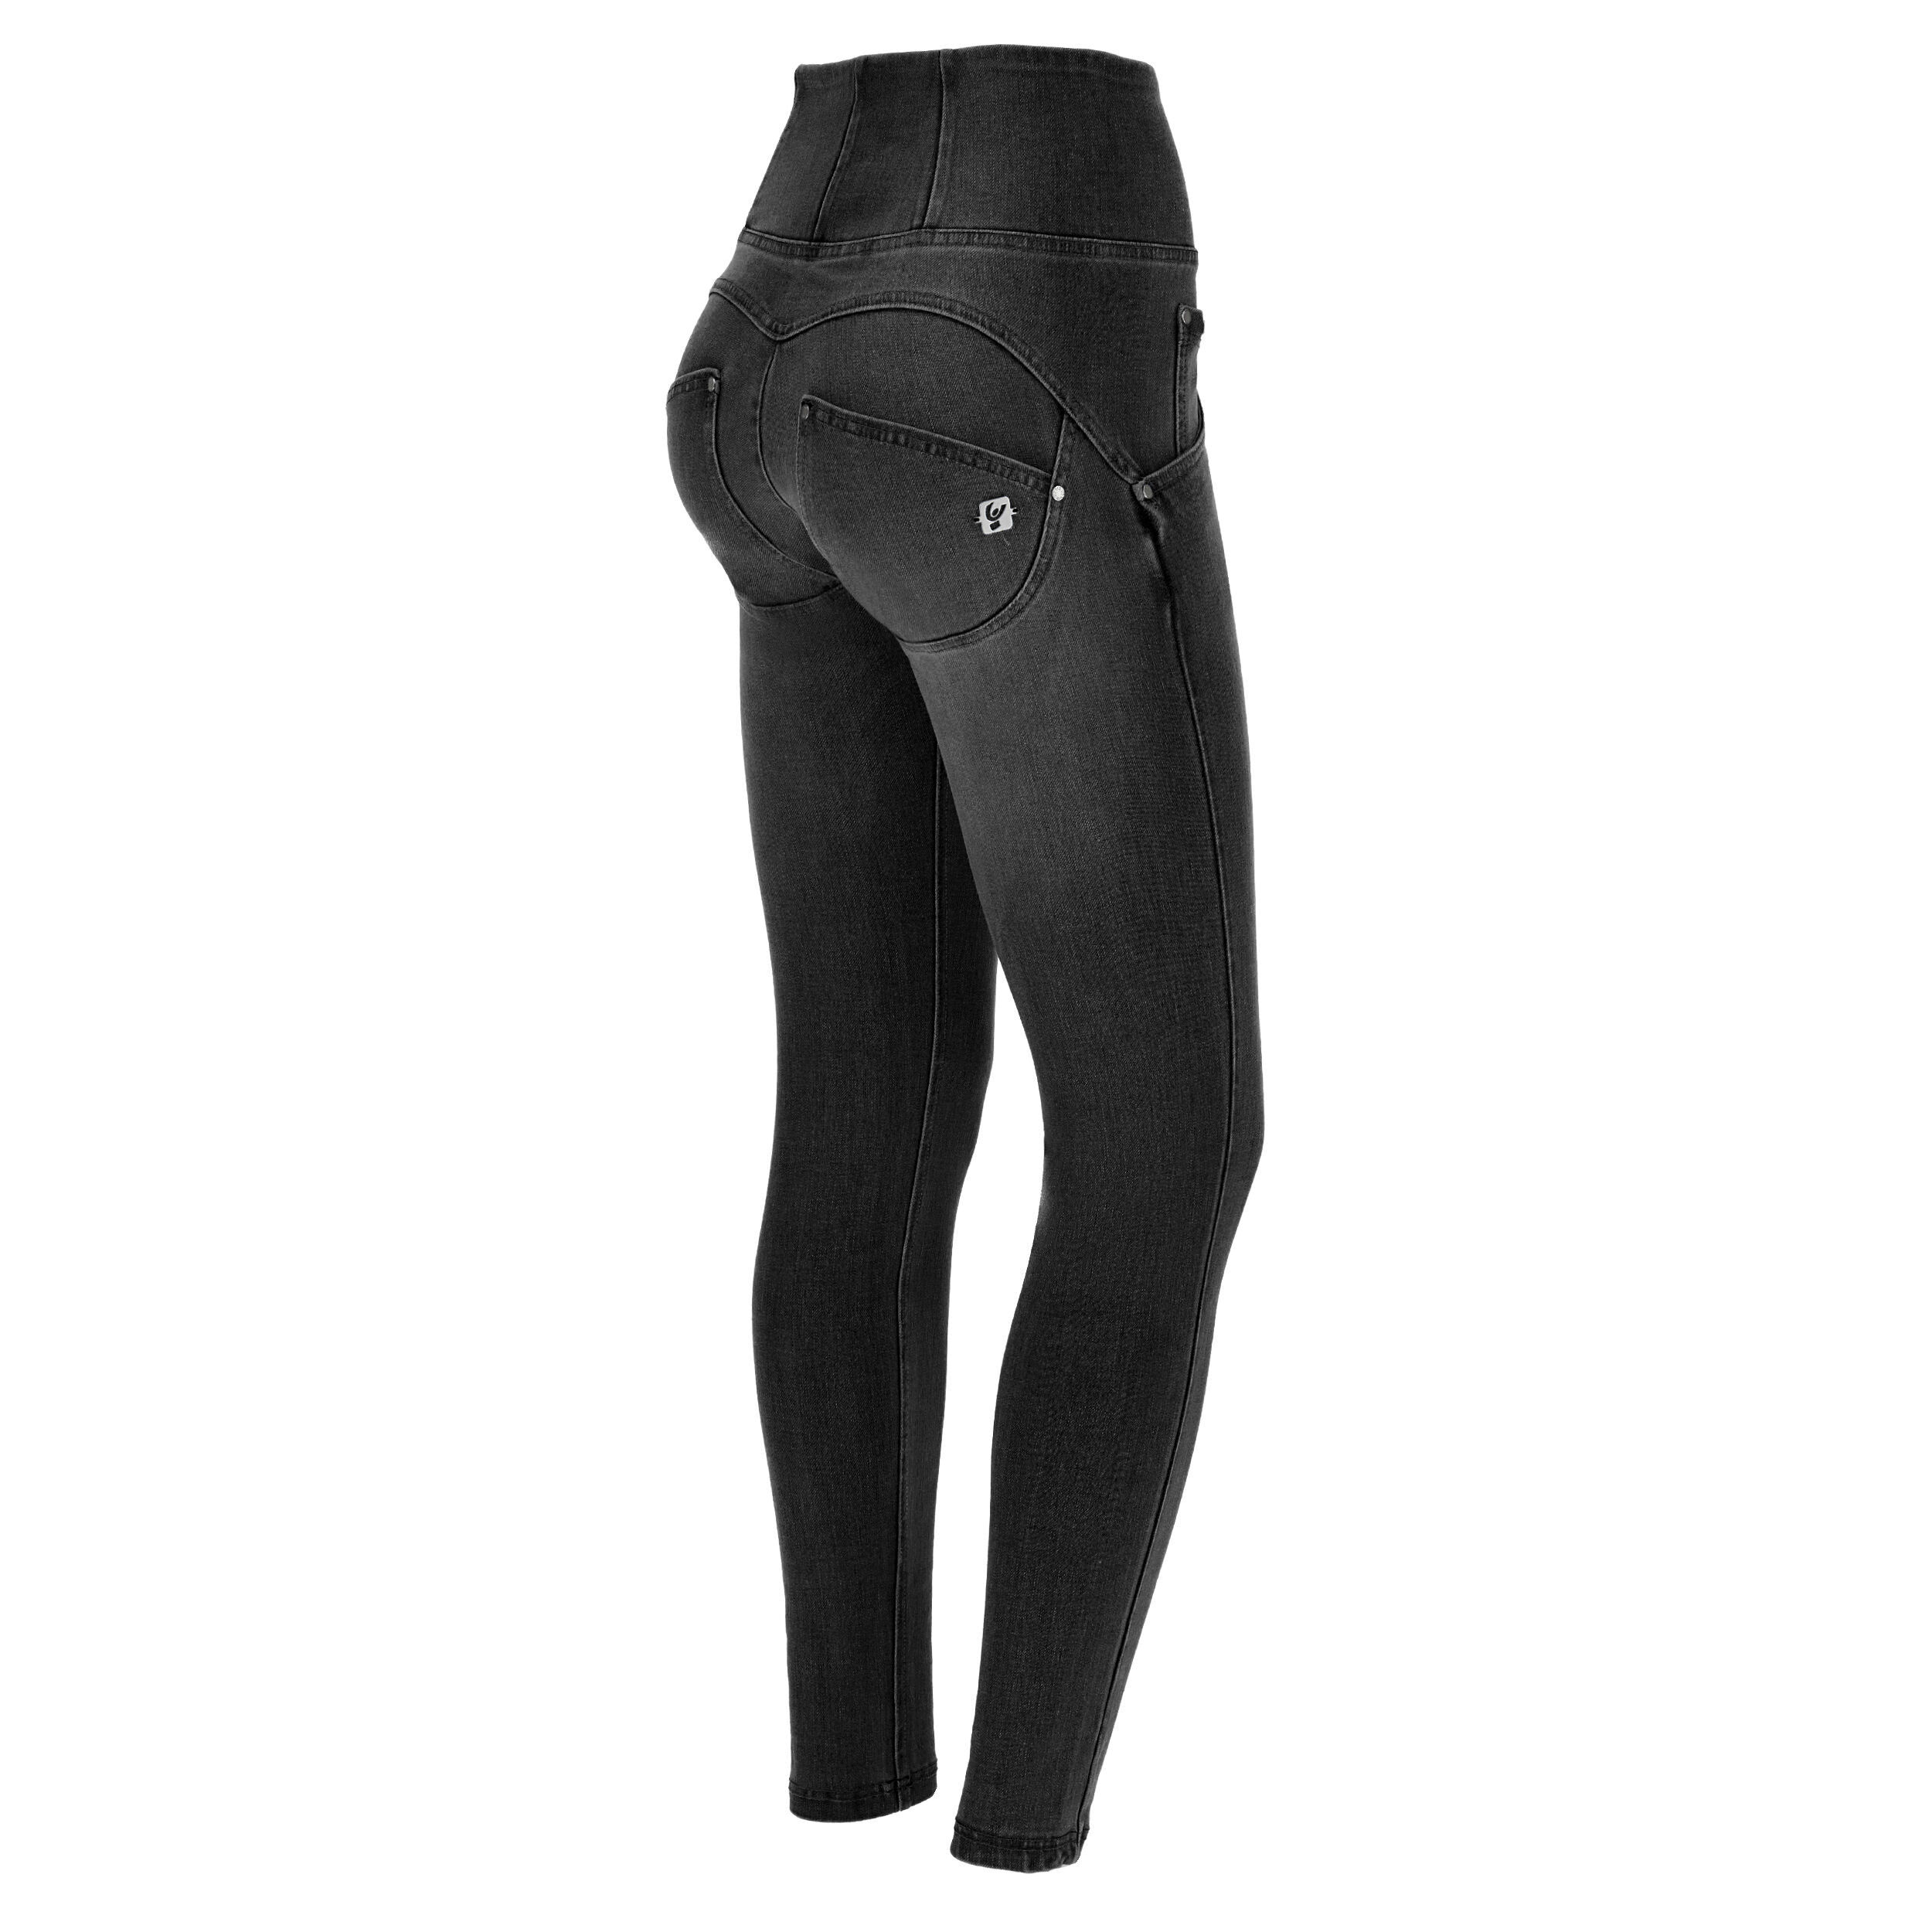 Freddy Jeans push up WR.UP® vita alta superskinny denim navetta ecologico Jeans Nero-Cuciture In Tono Donna Large